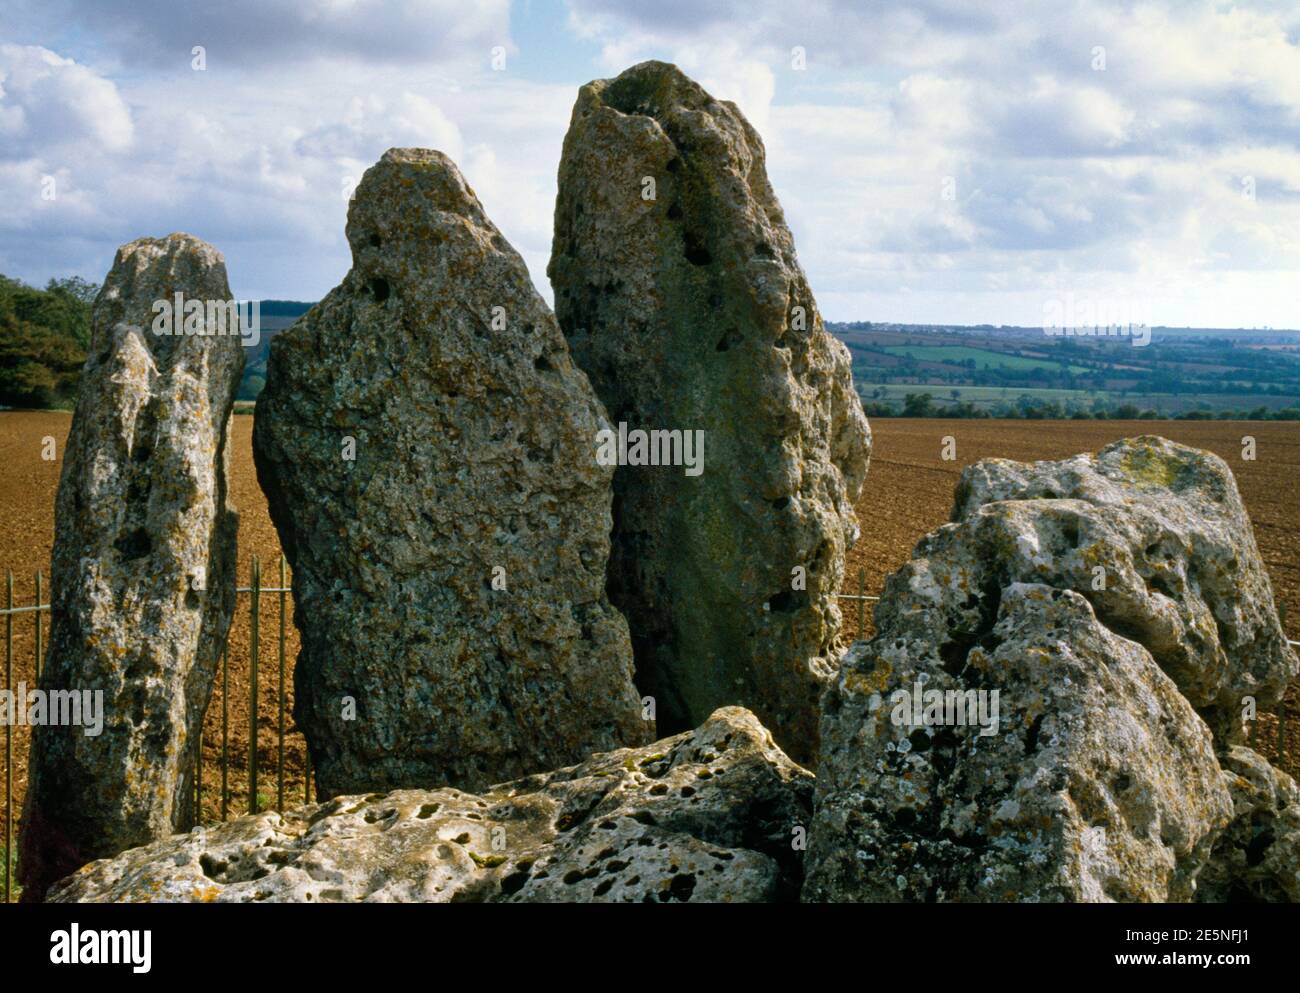 View SE of the Whispering Knights portal dolmen, Oxfordshire, UK: 5 limestone slabs, remains of a Neolithic burial chamber, fallen capstone bottom L. Stock Photo